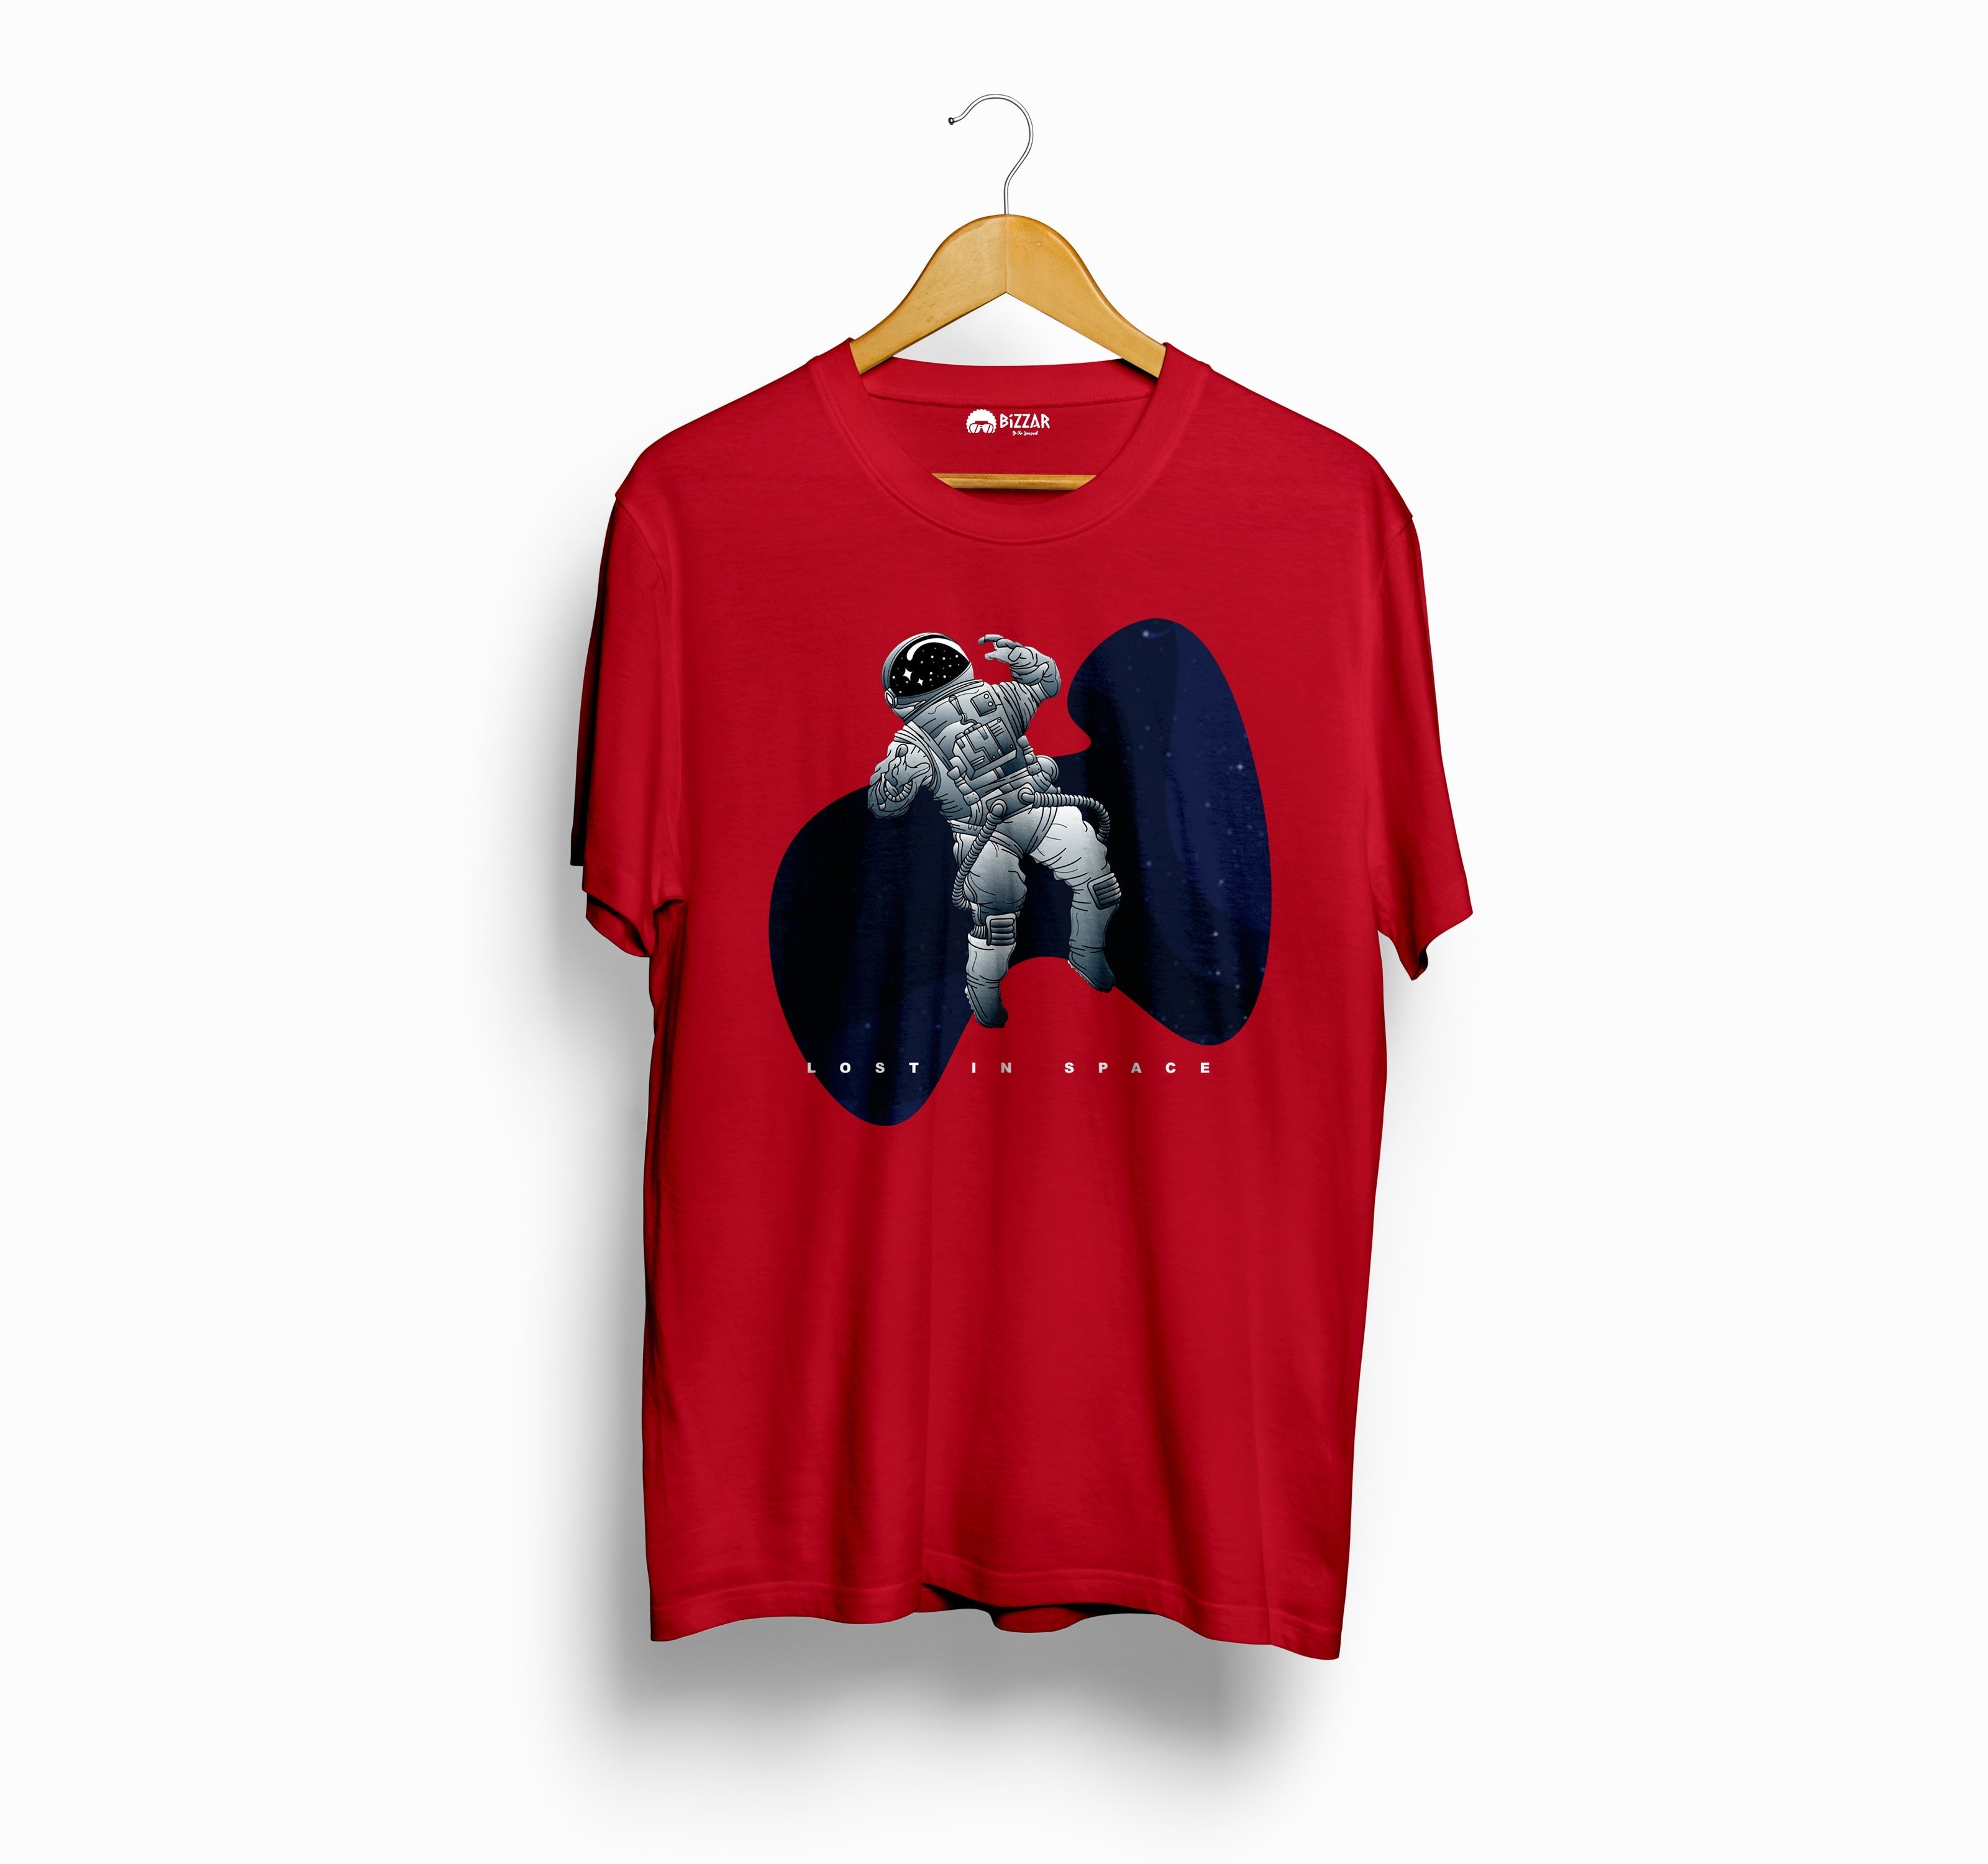 Bizzar's Lost in Space Red T-Shirt